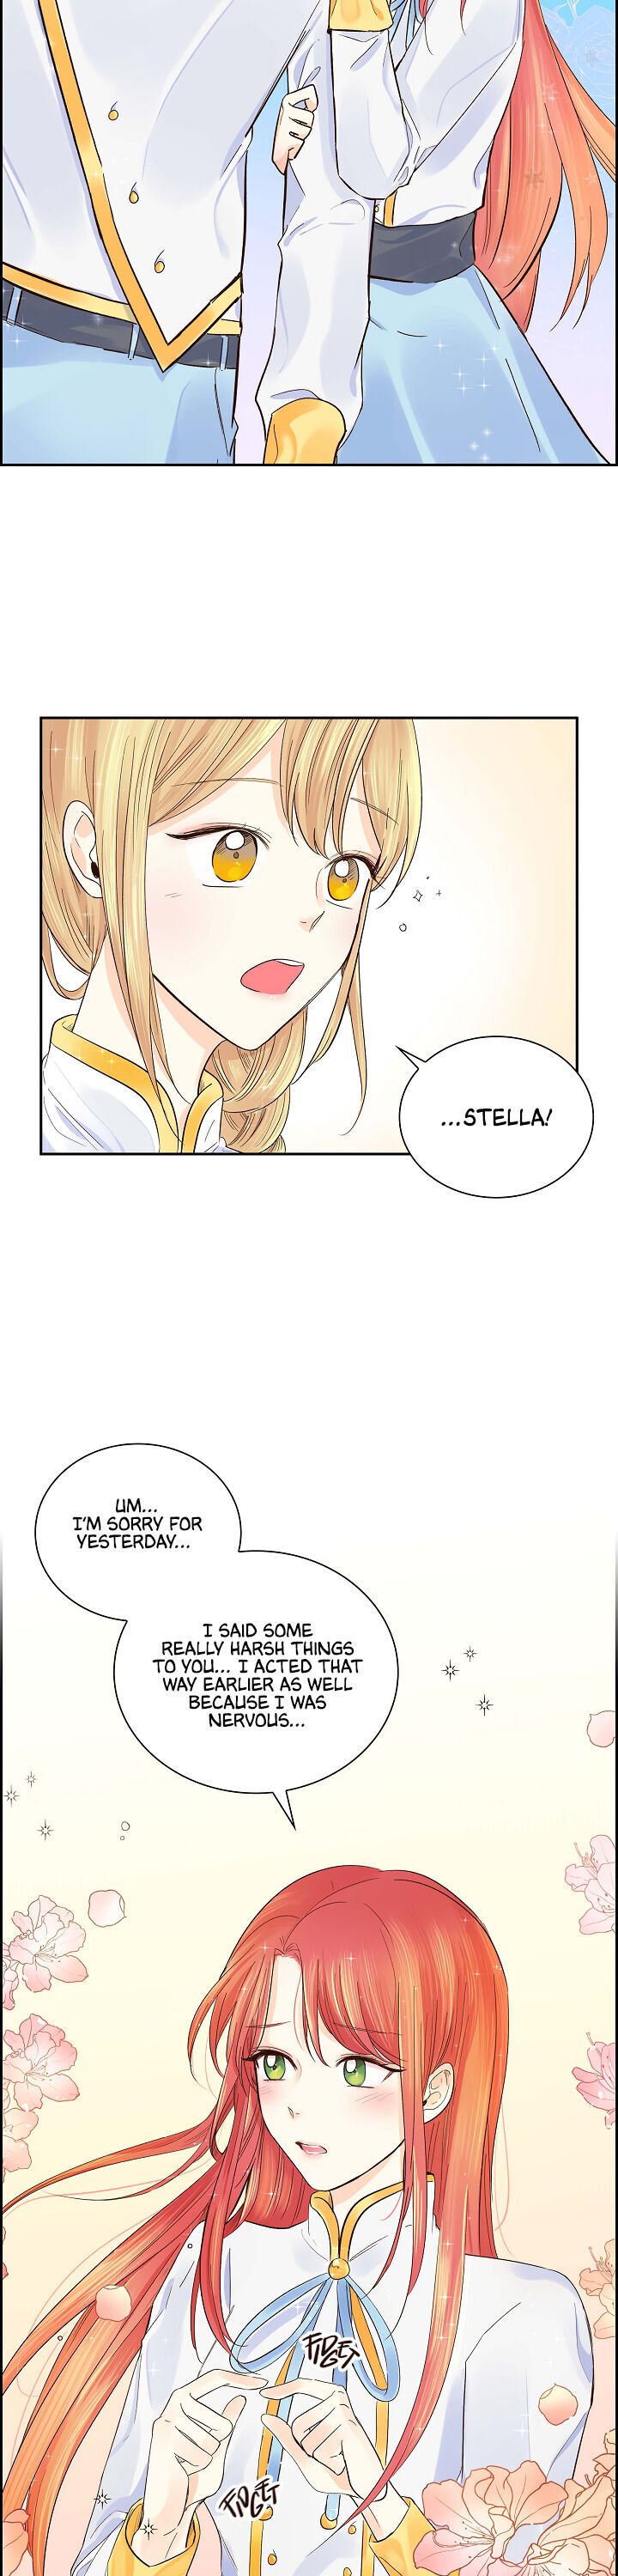 For Stella chapter 4